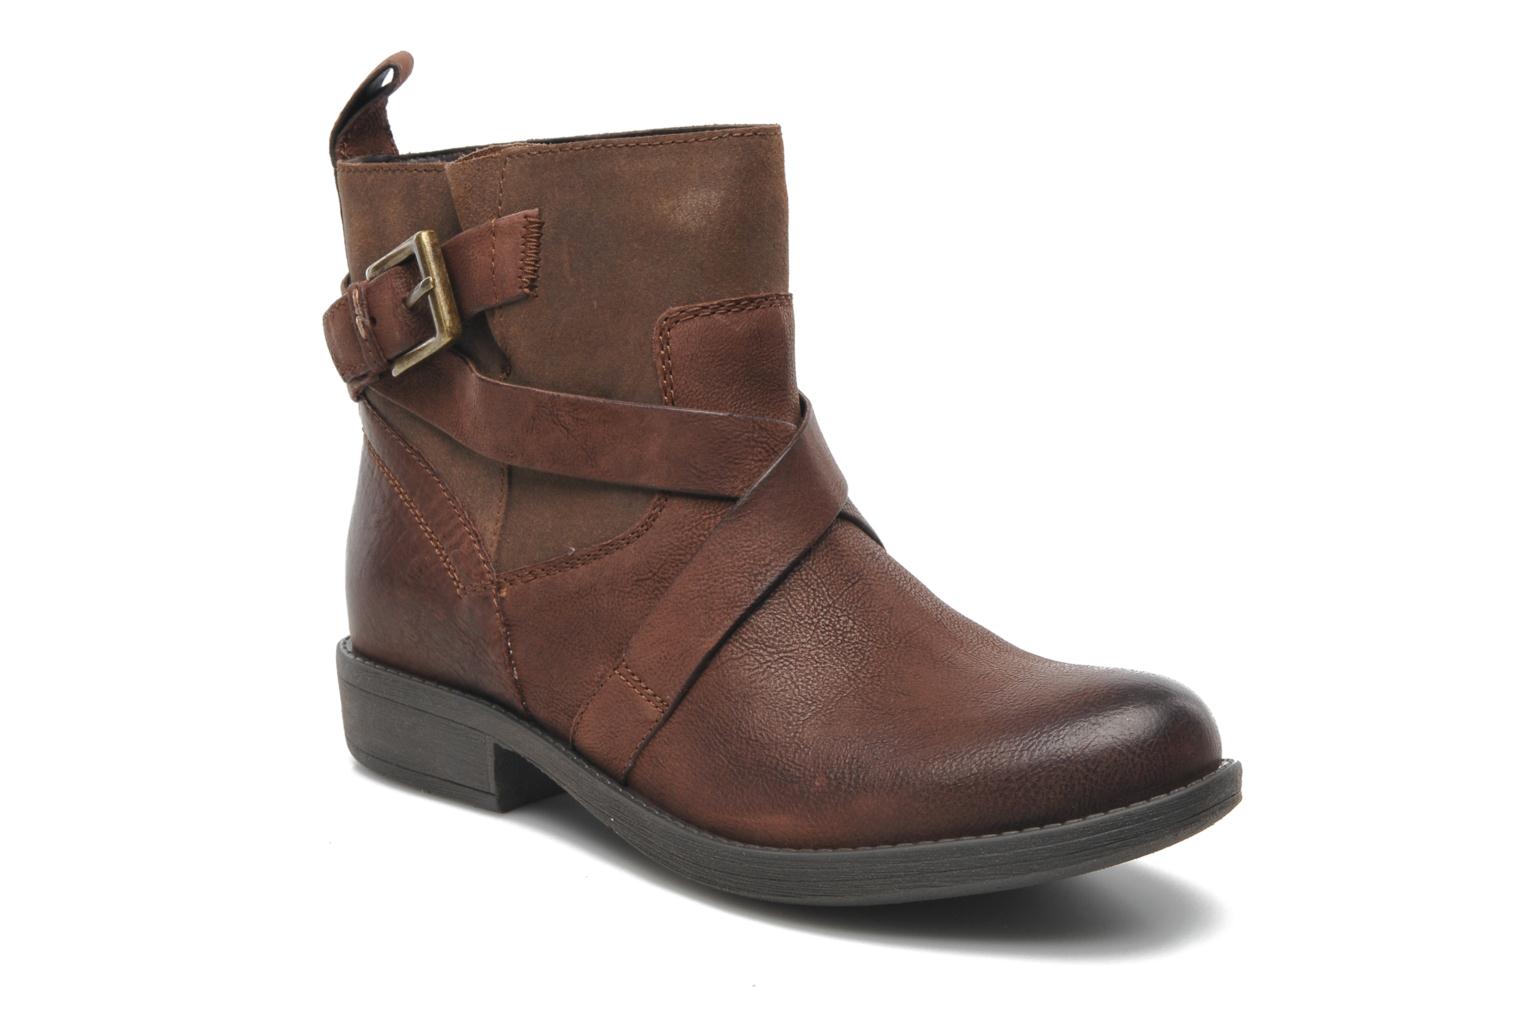 Clarks Merryn Trail Ankle boots in Brown at Sarenza (195054)